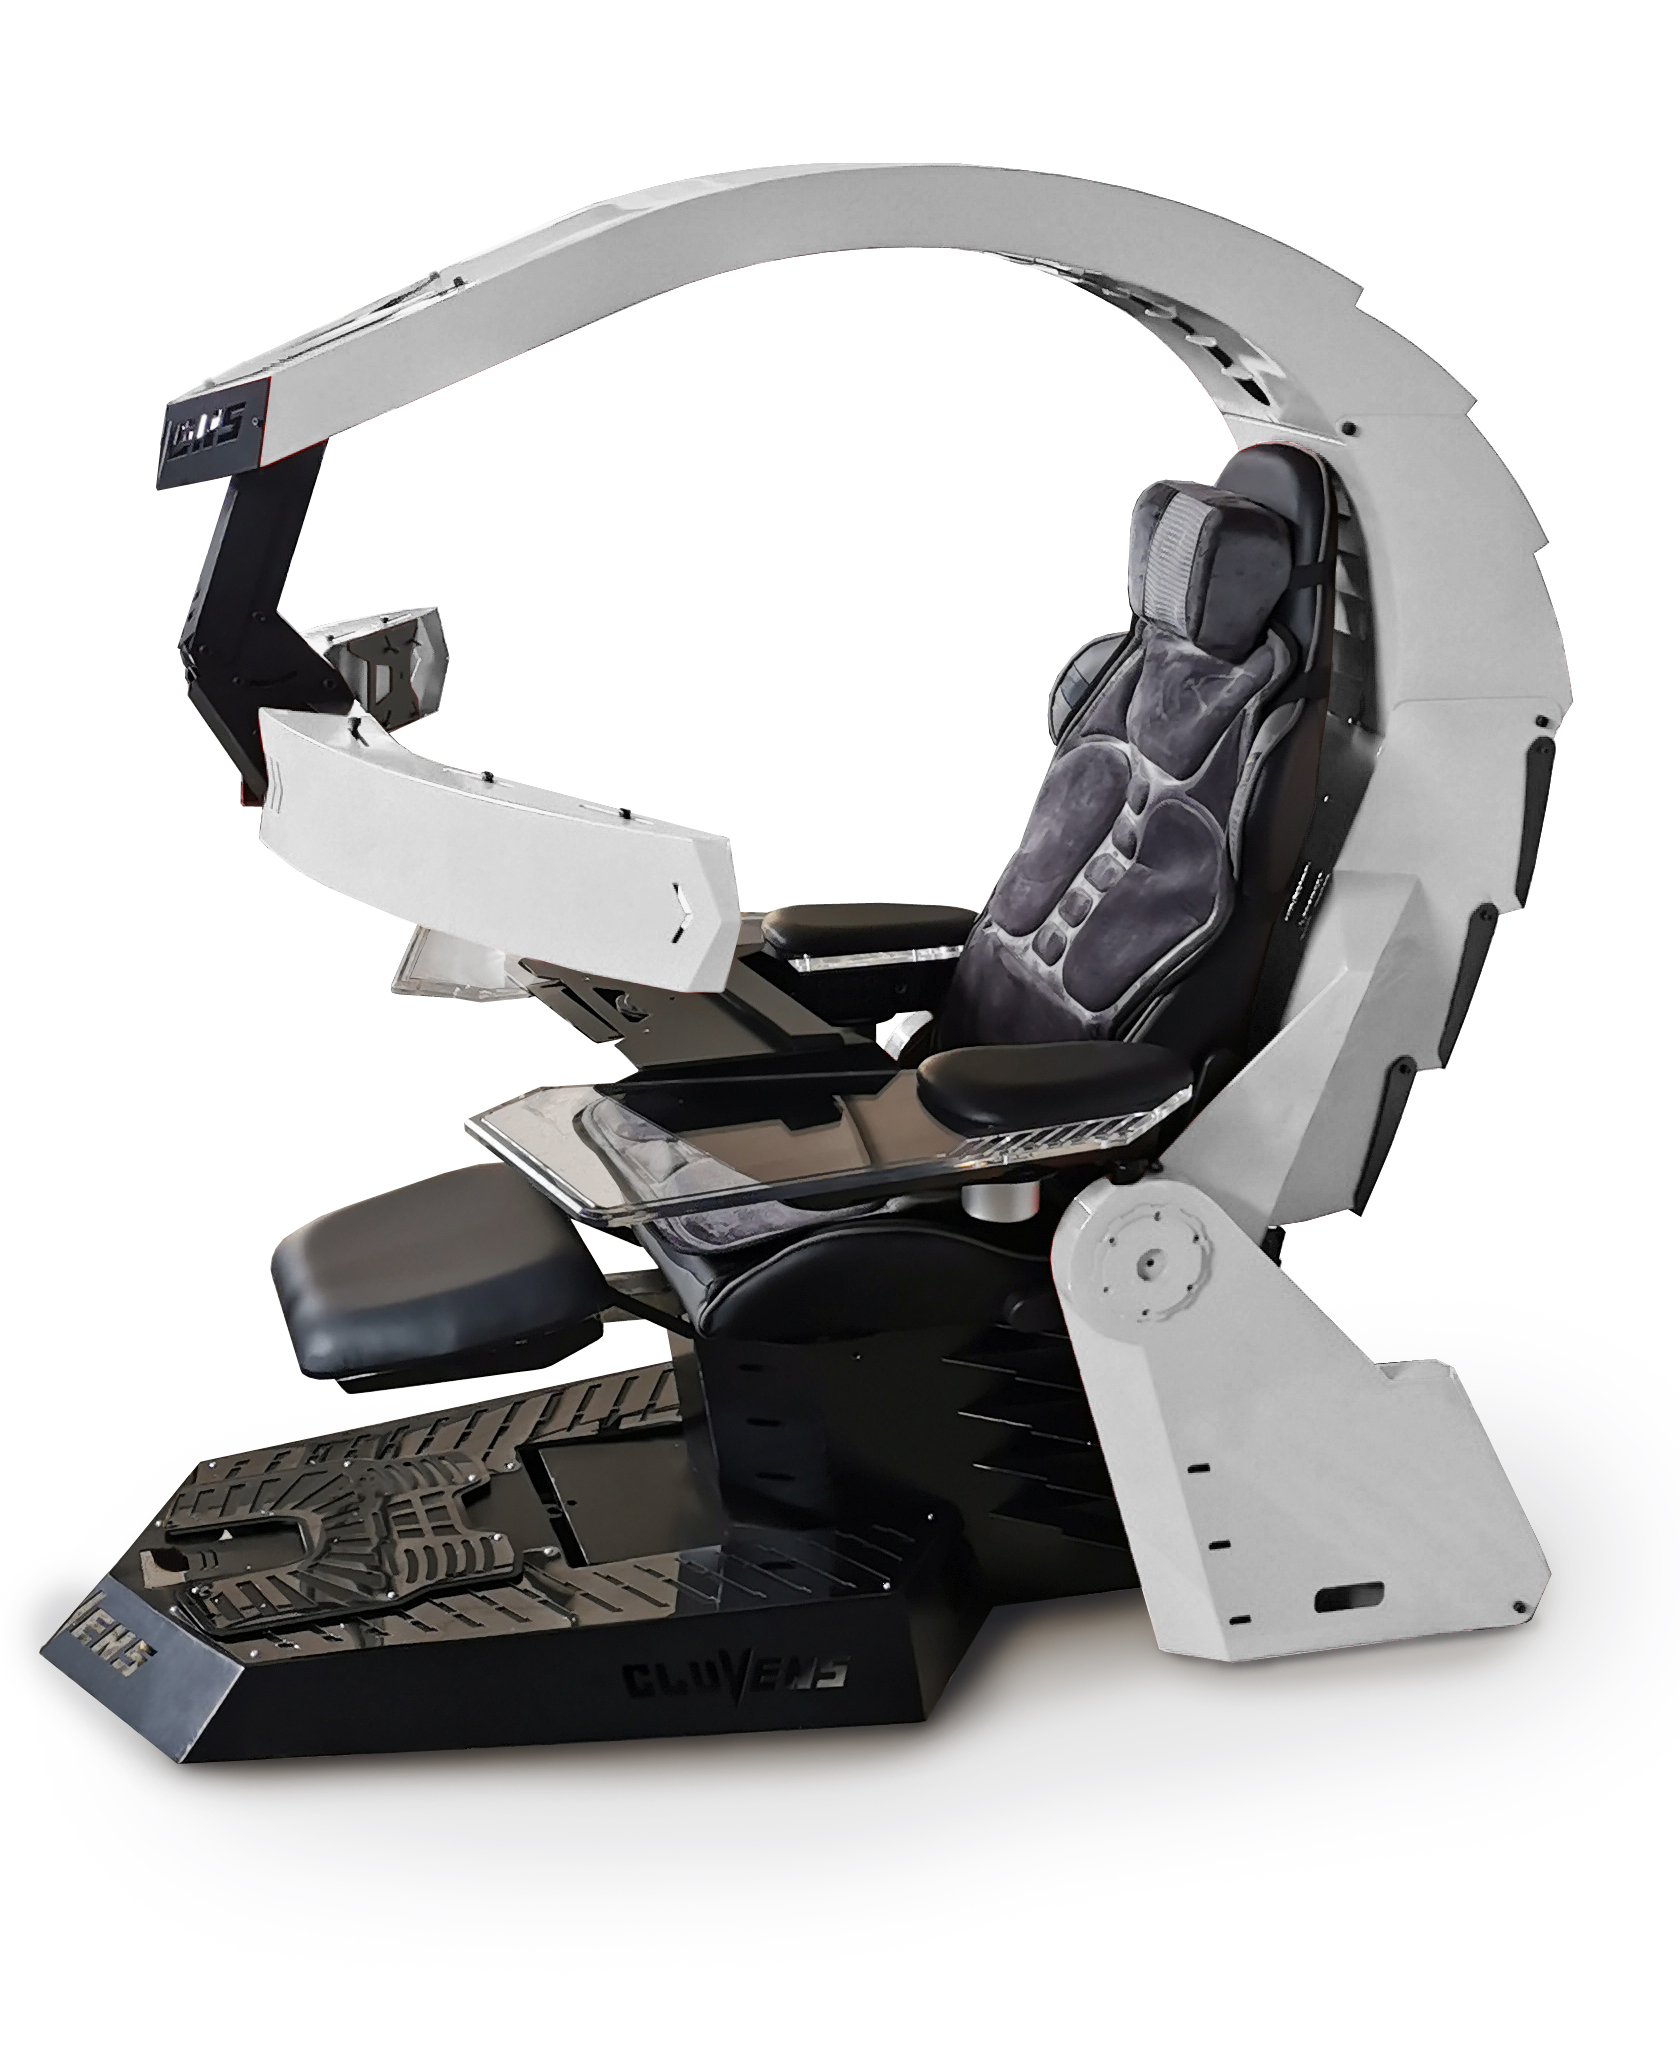 CLUVENS Unicorn Chair cockpit PU leather Racing seat zero gravity gaming chair cockpit support upto 5 monitors with extra heat and massage cushion